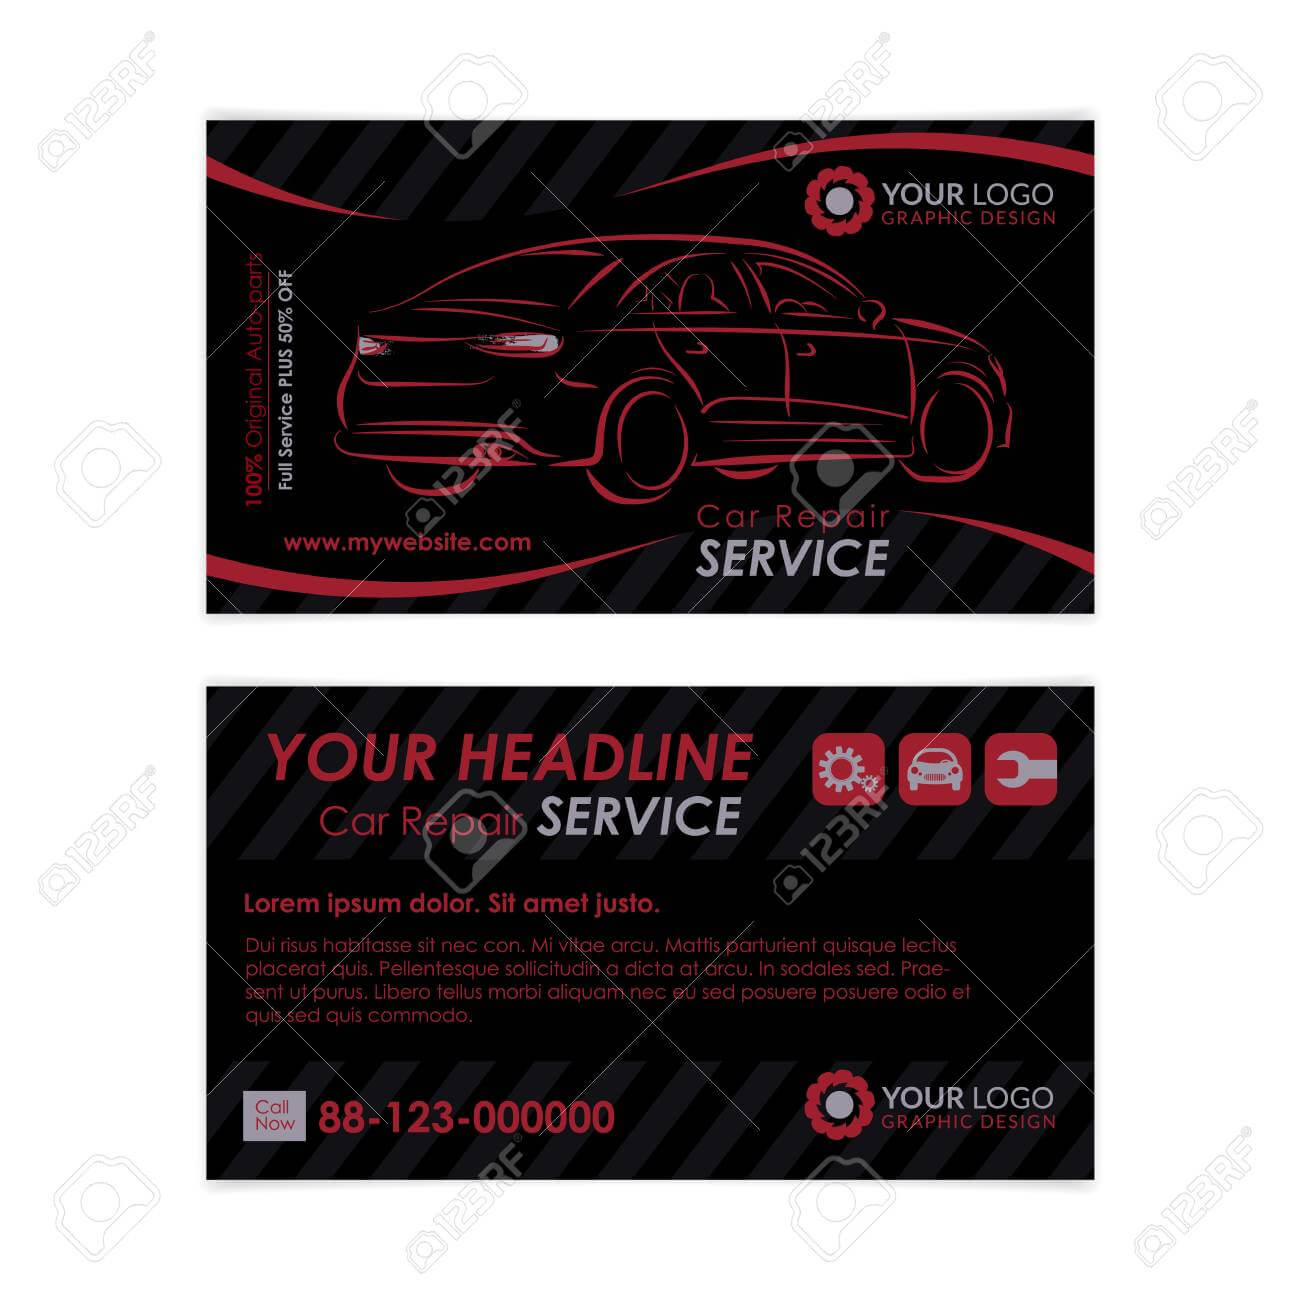 Auto Repair Business Card Template. Create Your Own Business.. For Automotive Business Card Templates